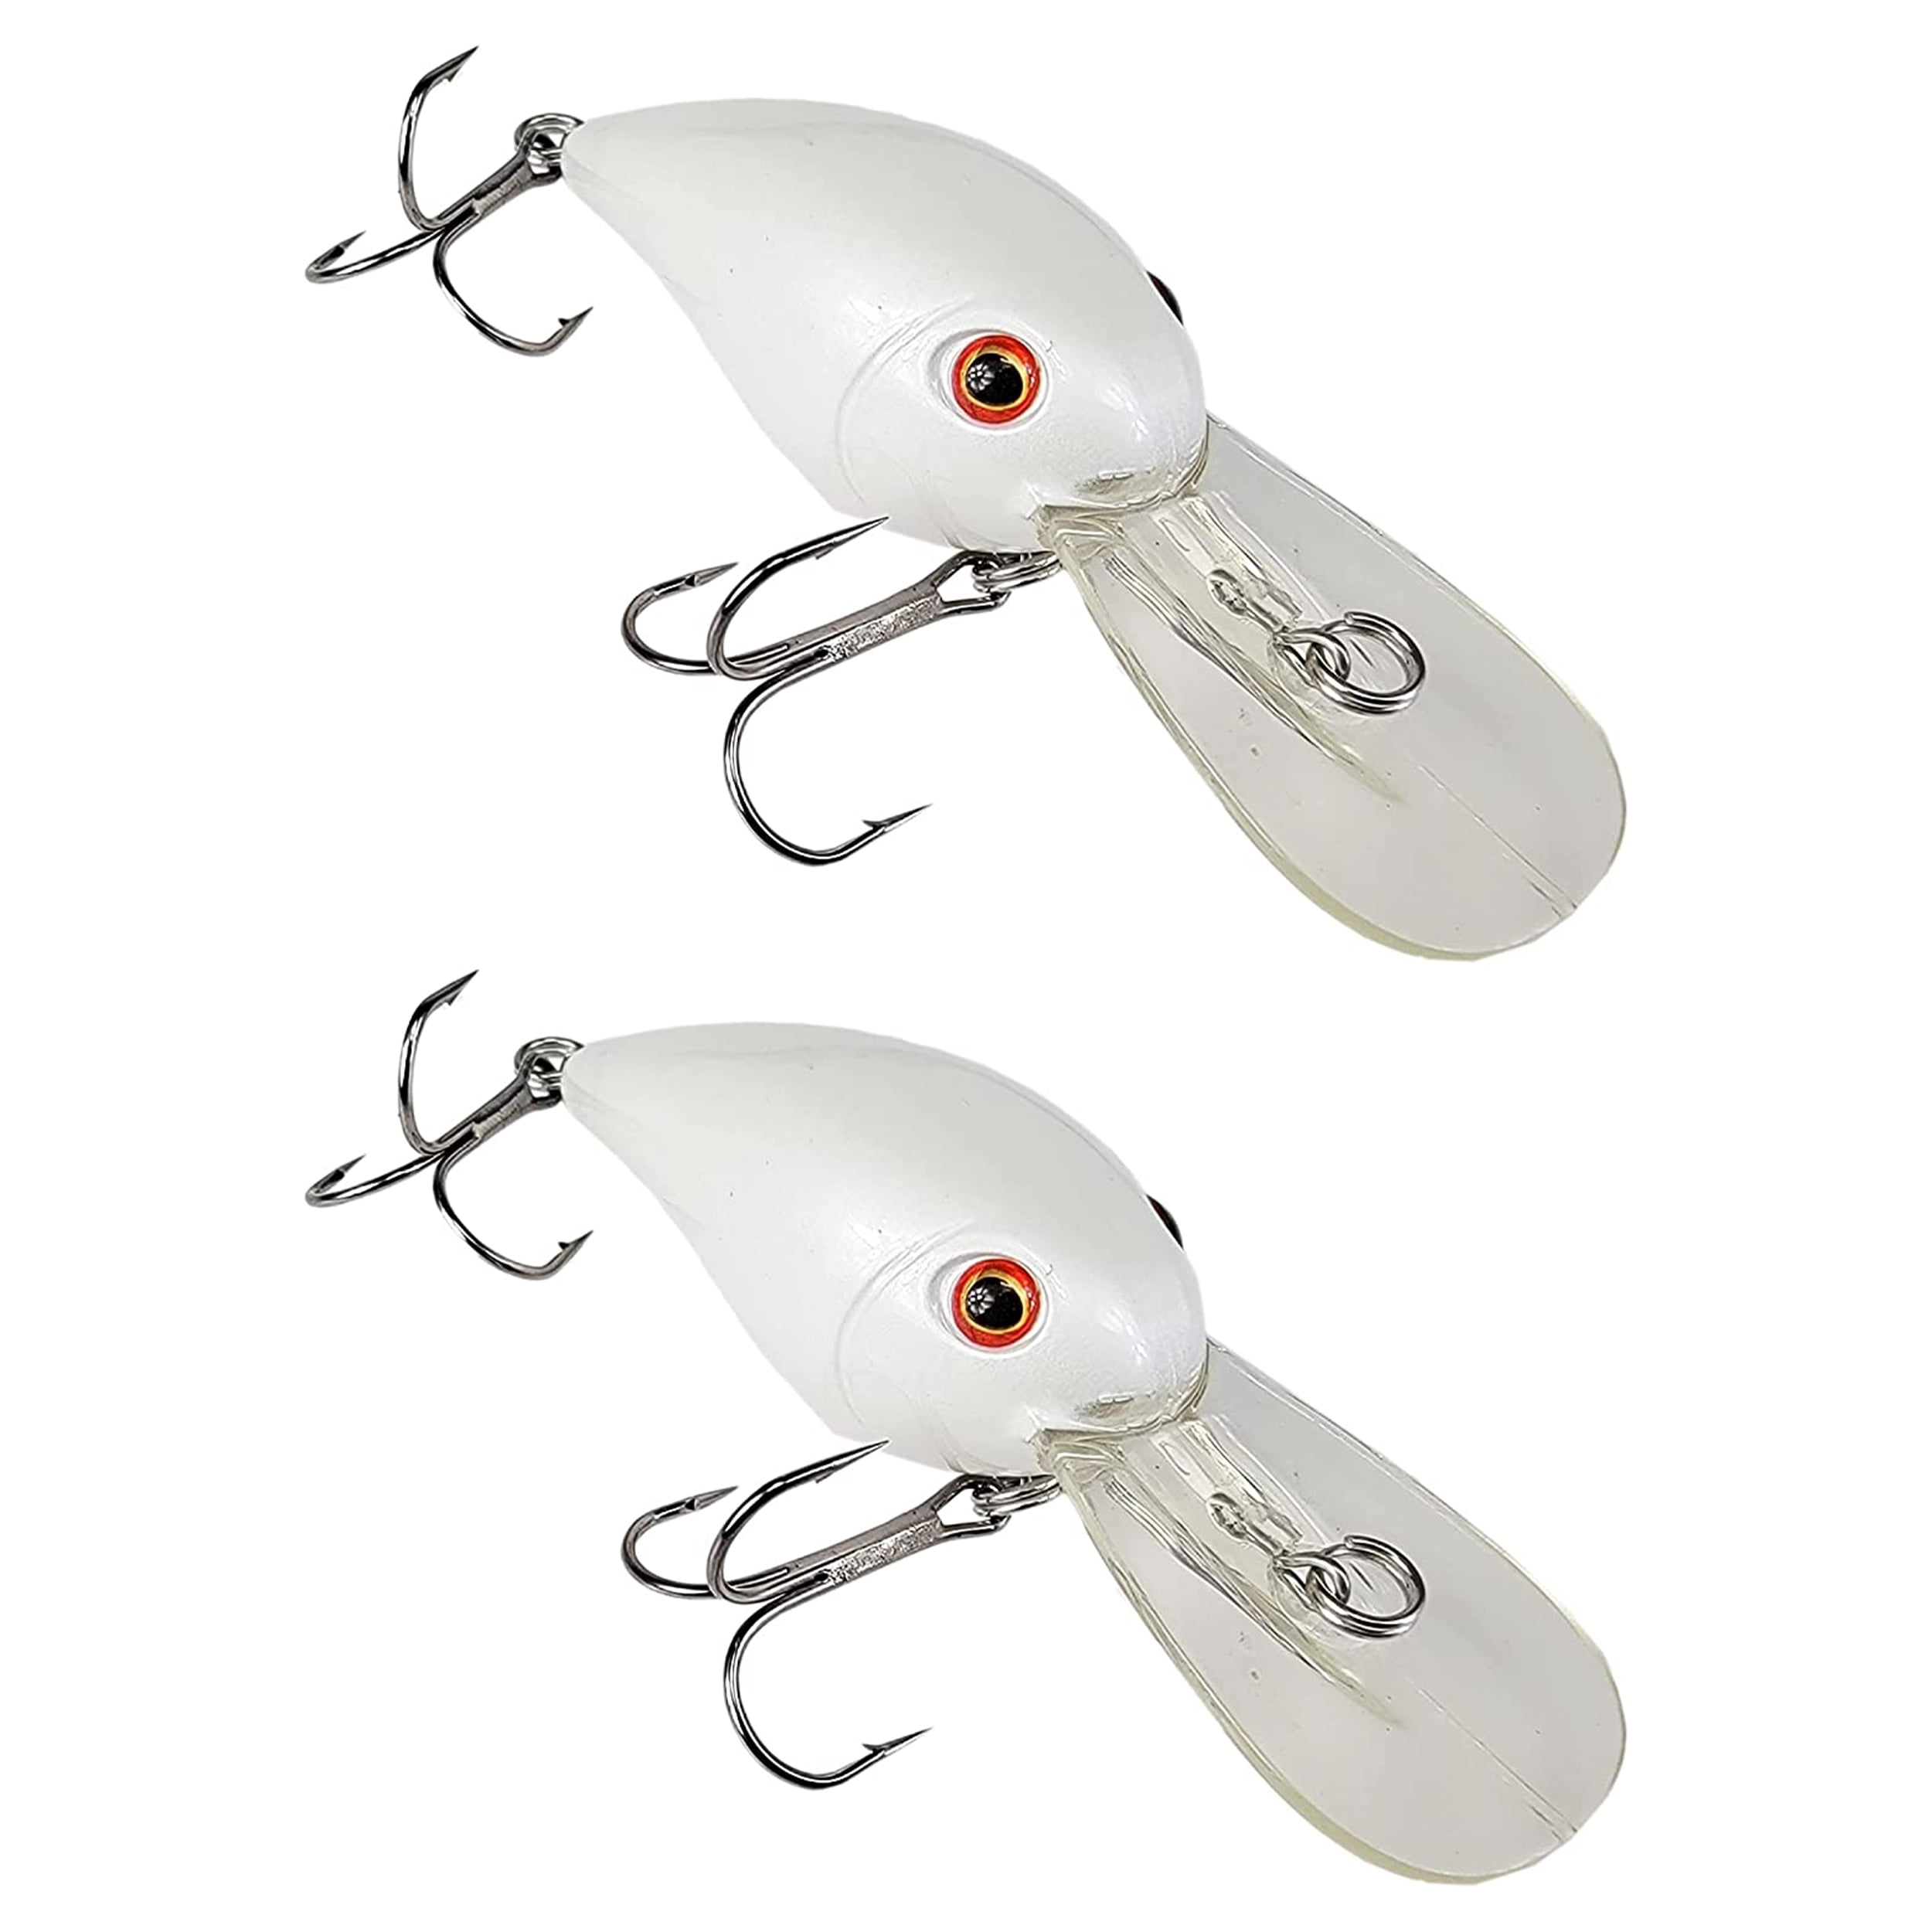 Tackle HD 2-Pack Lipped Crankbait, Fishing Bait with 9 to 14 Feet Depth, Fishing  Lures for Freshwater or Saltwater, Hard Swimbaits for Bass, Crappie, or  Walleye, Pearl Red Eye 